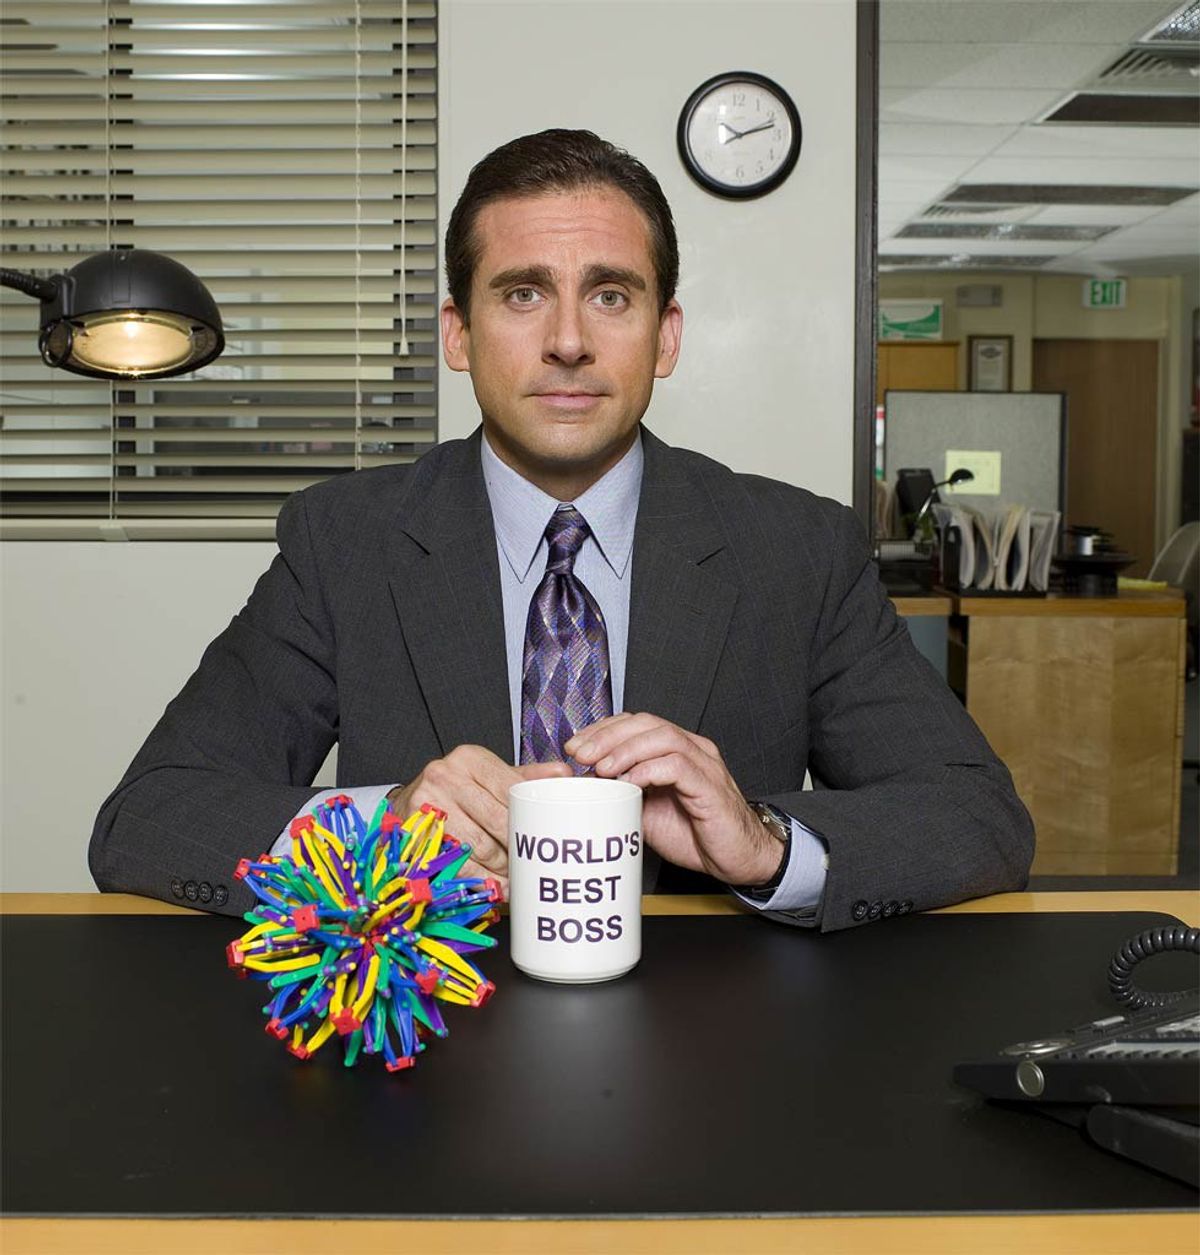 11 Lessons The Office Taught Me